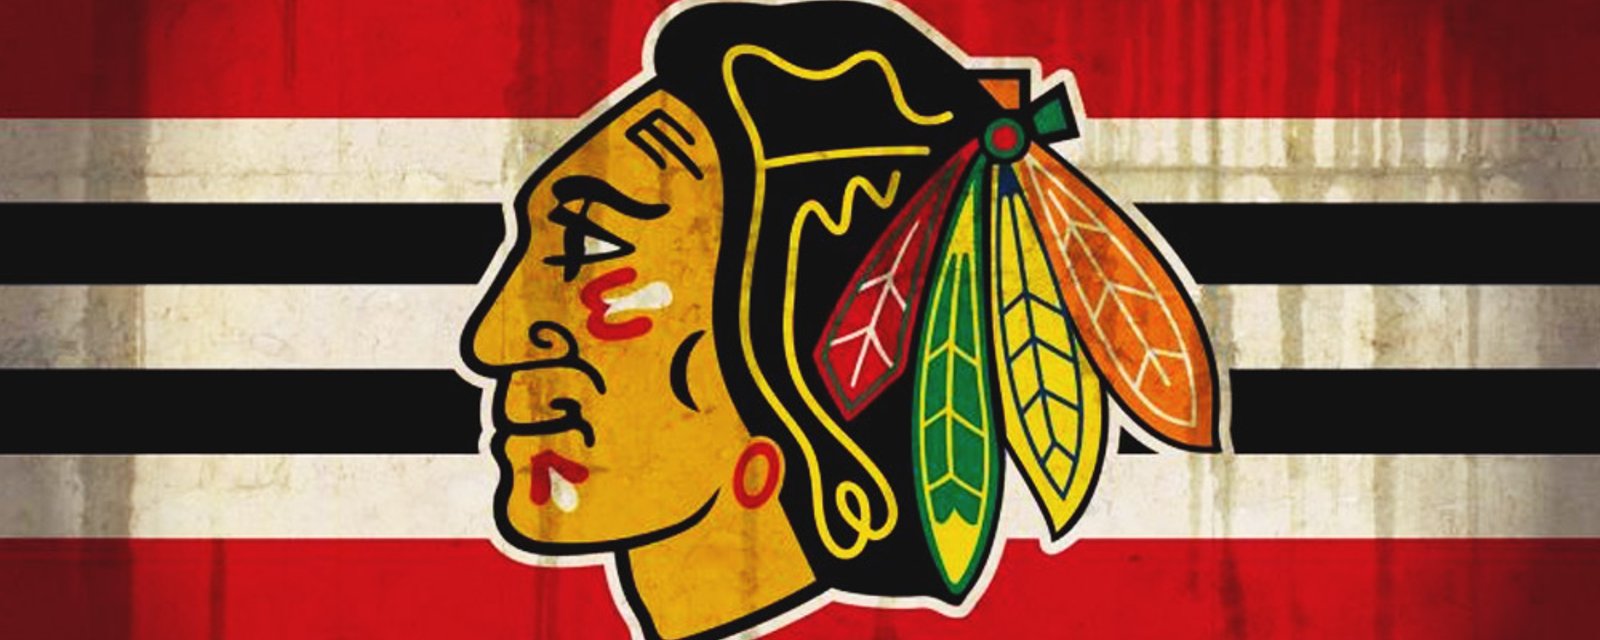 BREAKING: Chicago Blackhawks sign KEY player to two-year extension.